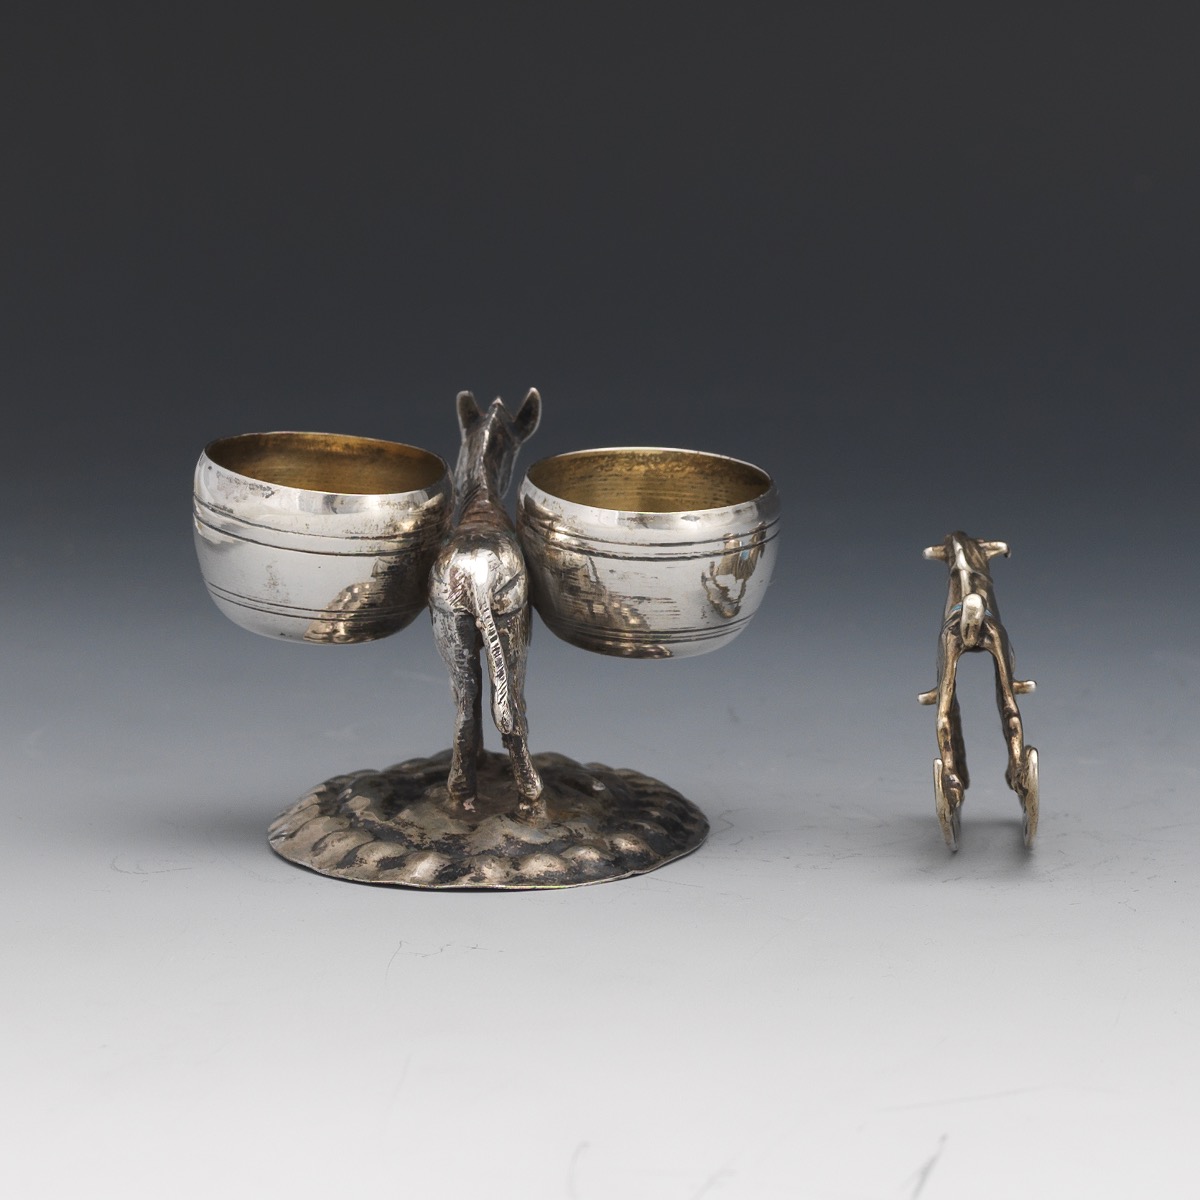 Italian Silver, Gold Wash and Enamel Donkey Salt/Pepper Cellar and Baby Rocking Horse - Image 5 of 7